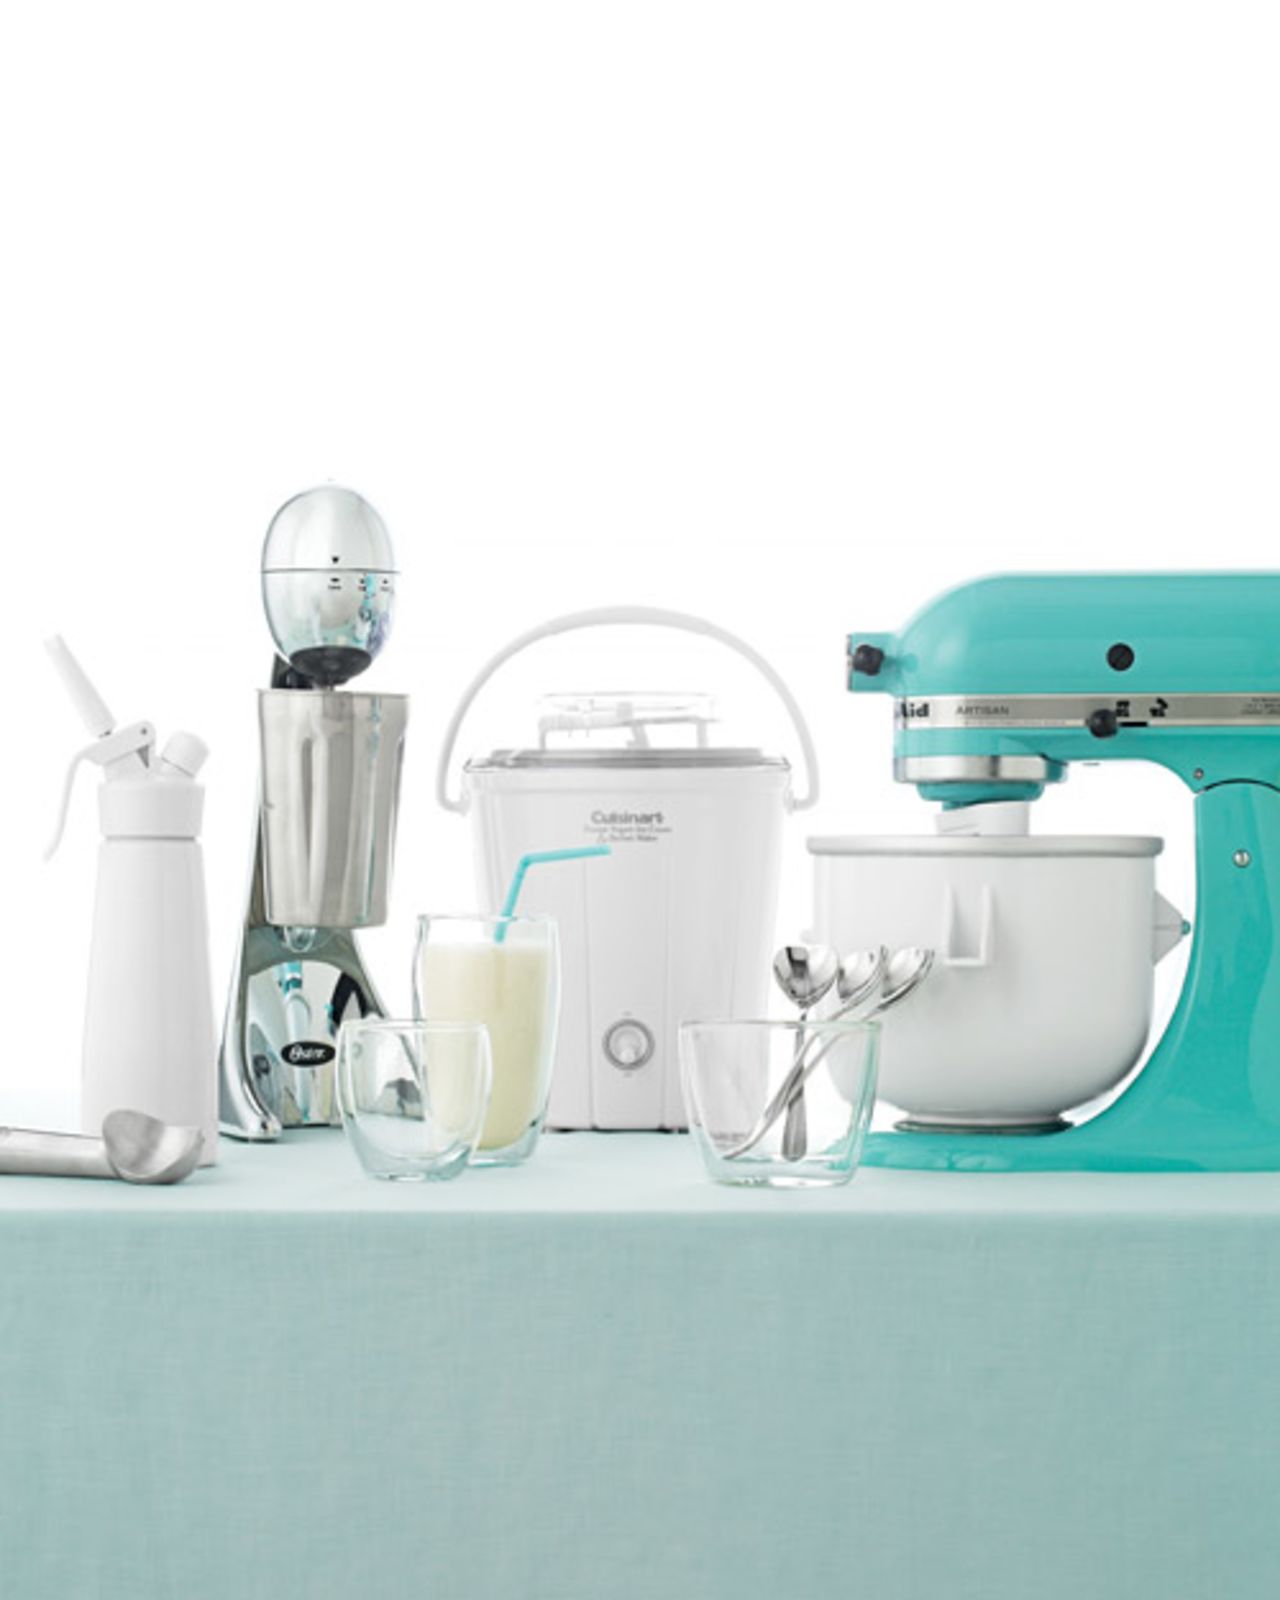 3. Blenders are great, but do you need more than one? A registry helps cut down on duplicates.